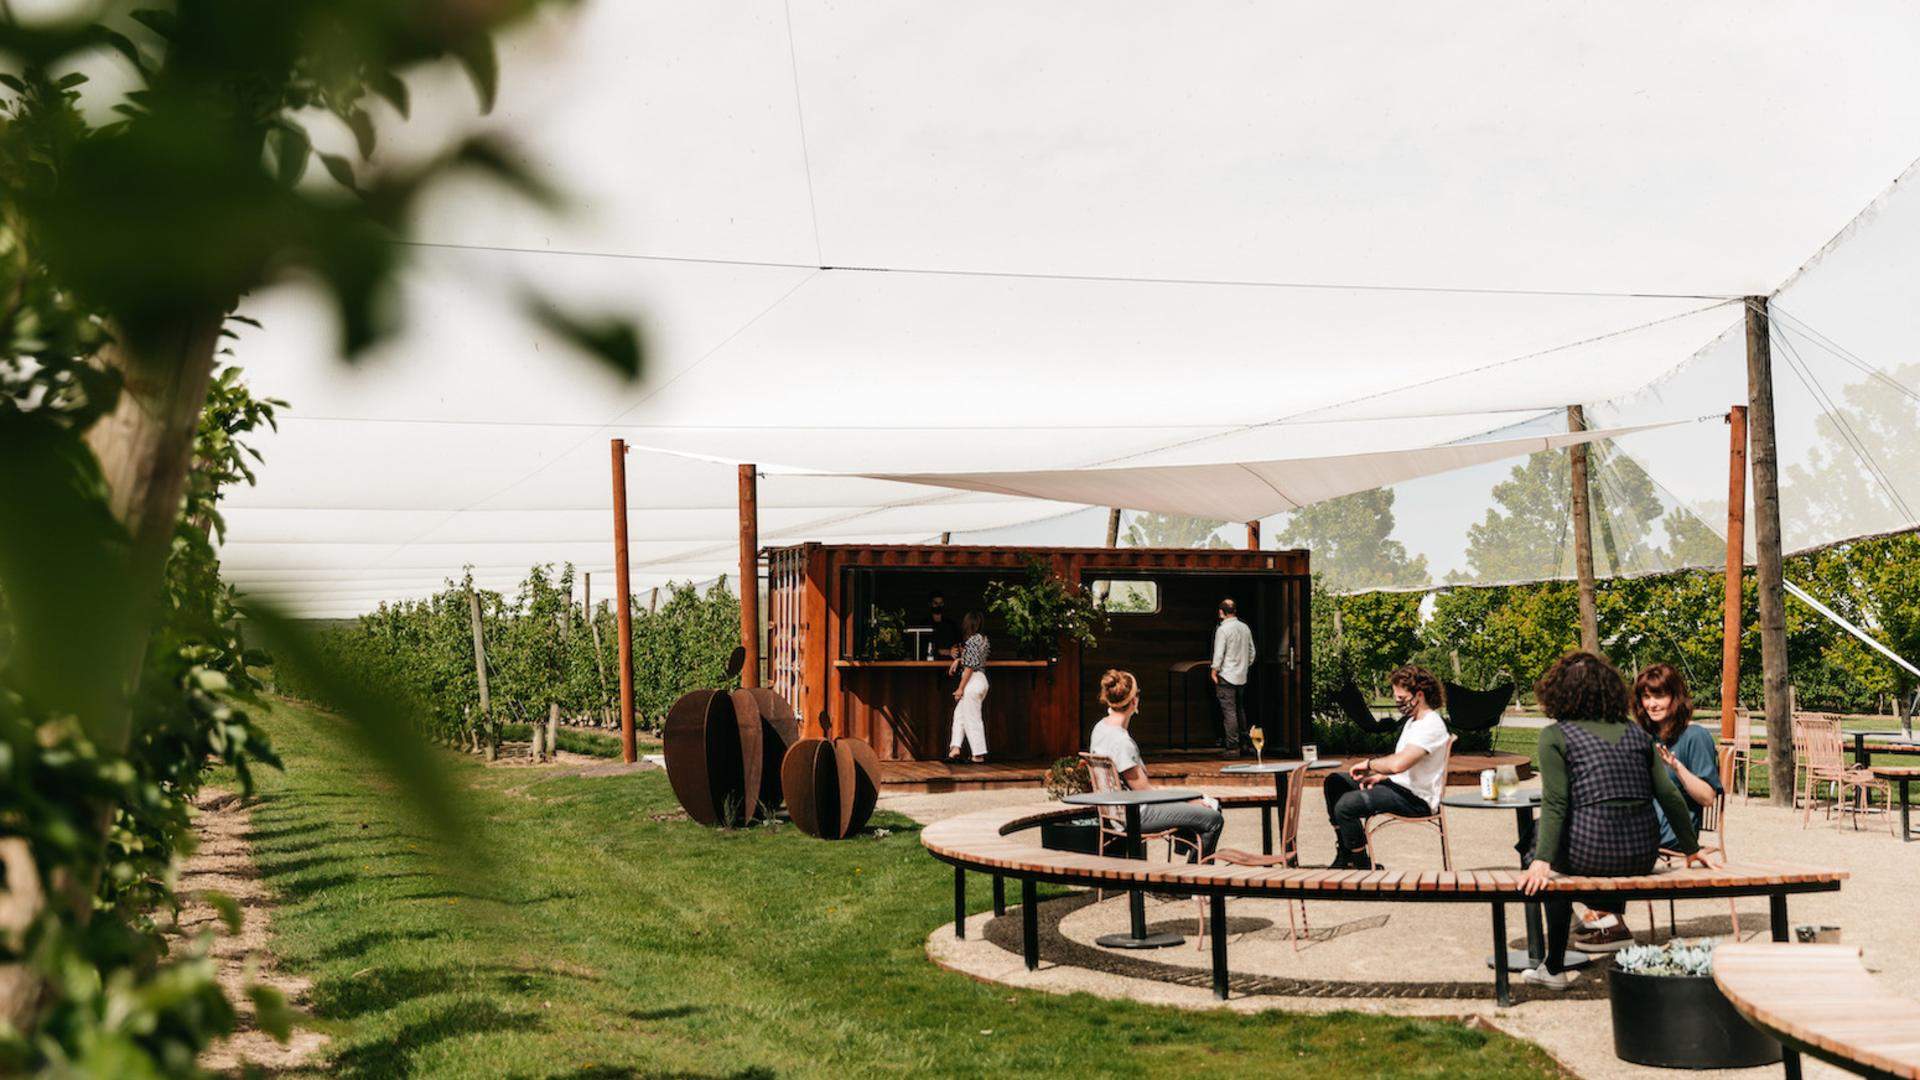 Cider Maker Napoleone Has Unveiled Its New Yarra Valley Bar in the Middle of Its Orchard